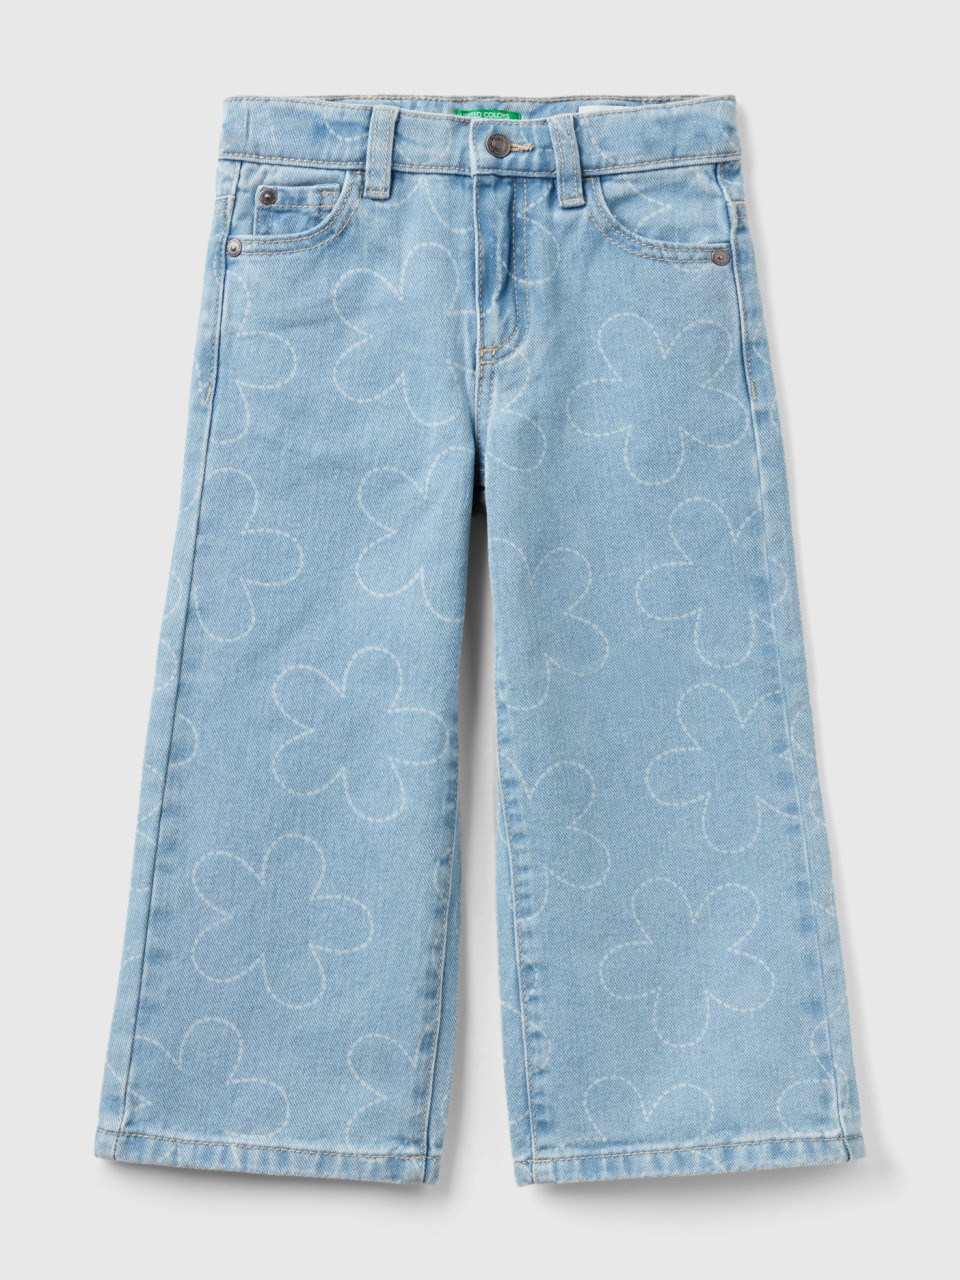 Benetton, Wide Fit Jeans With Flowers, Sky Blue, Kids